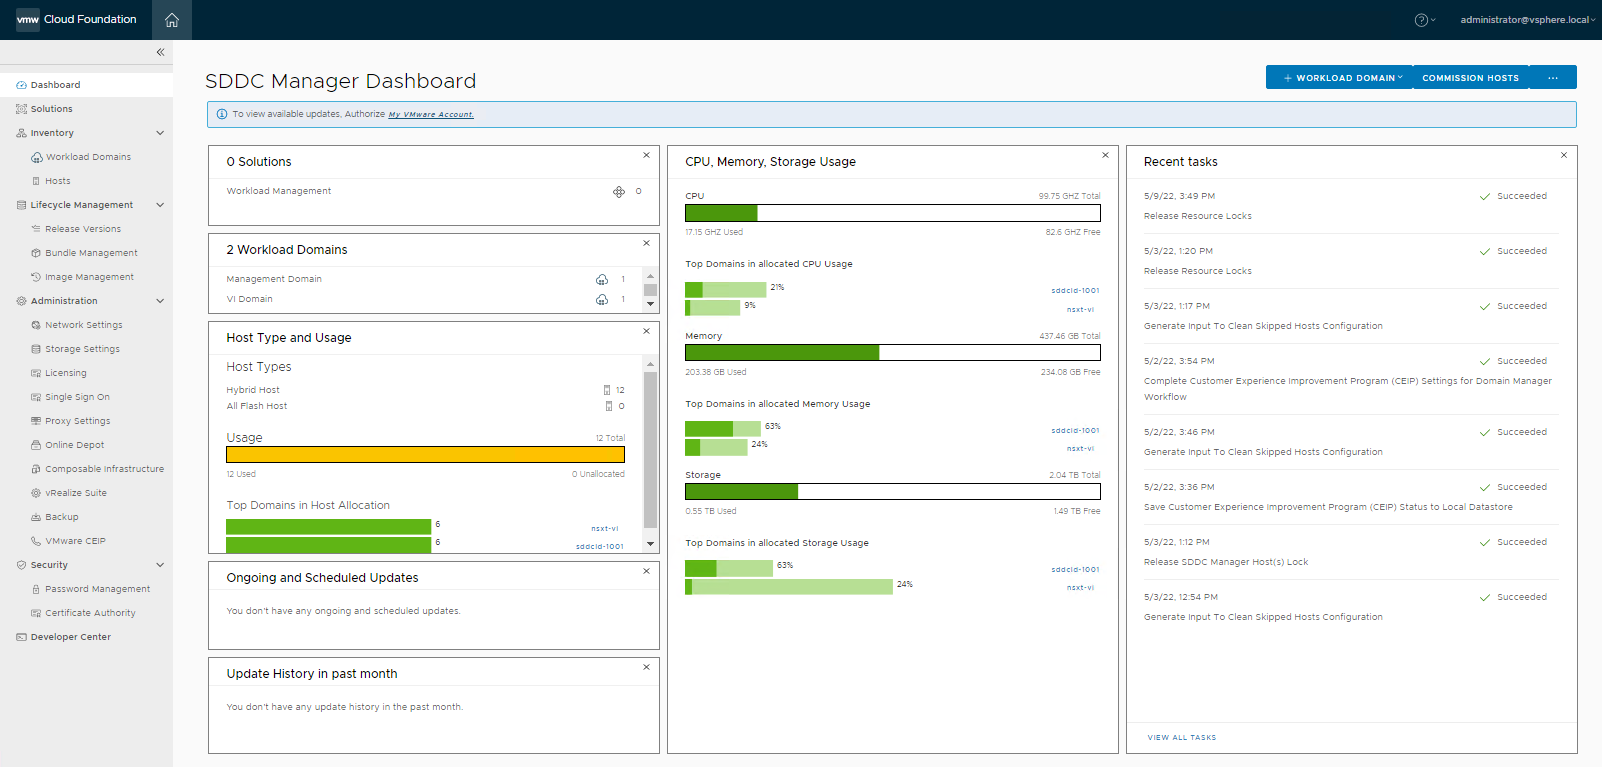 View of the SDDC Manager Dashboard